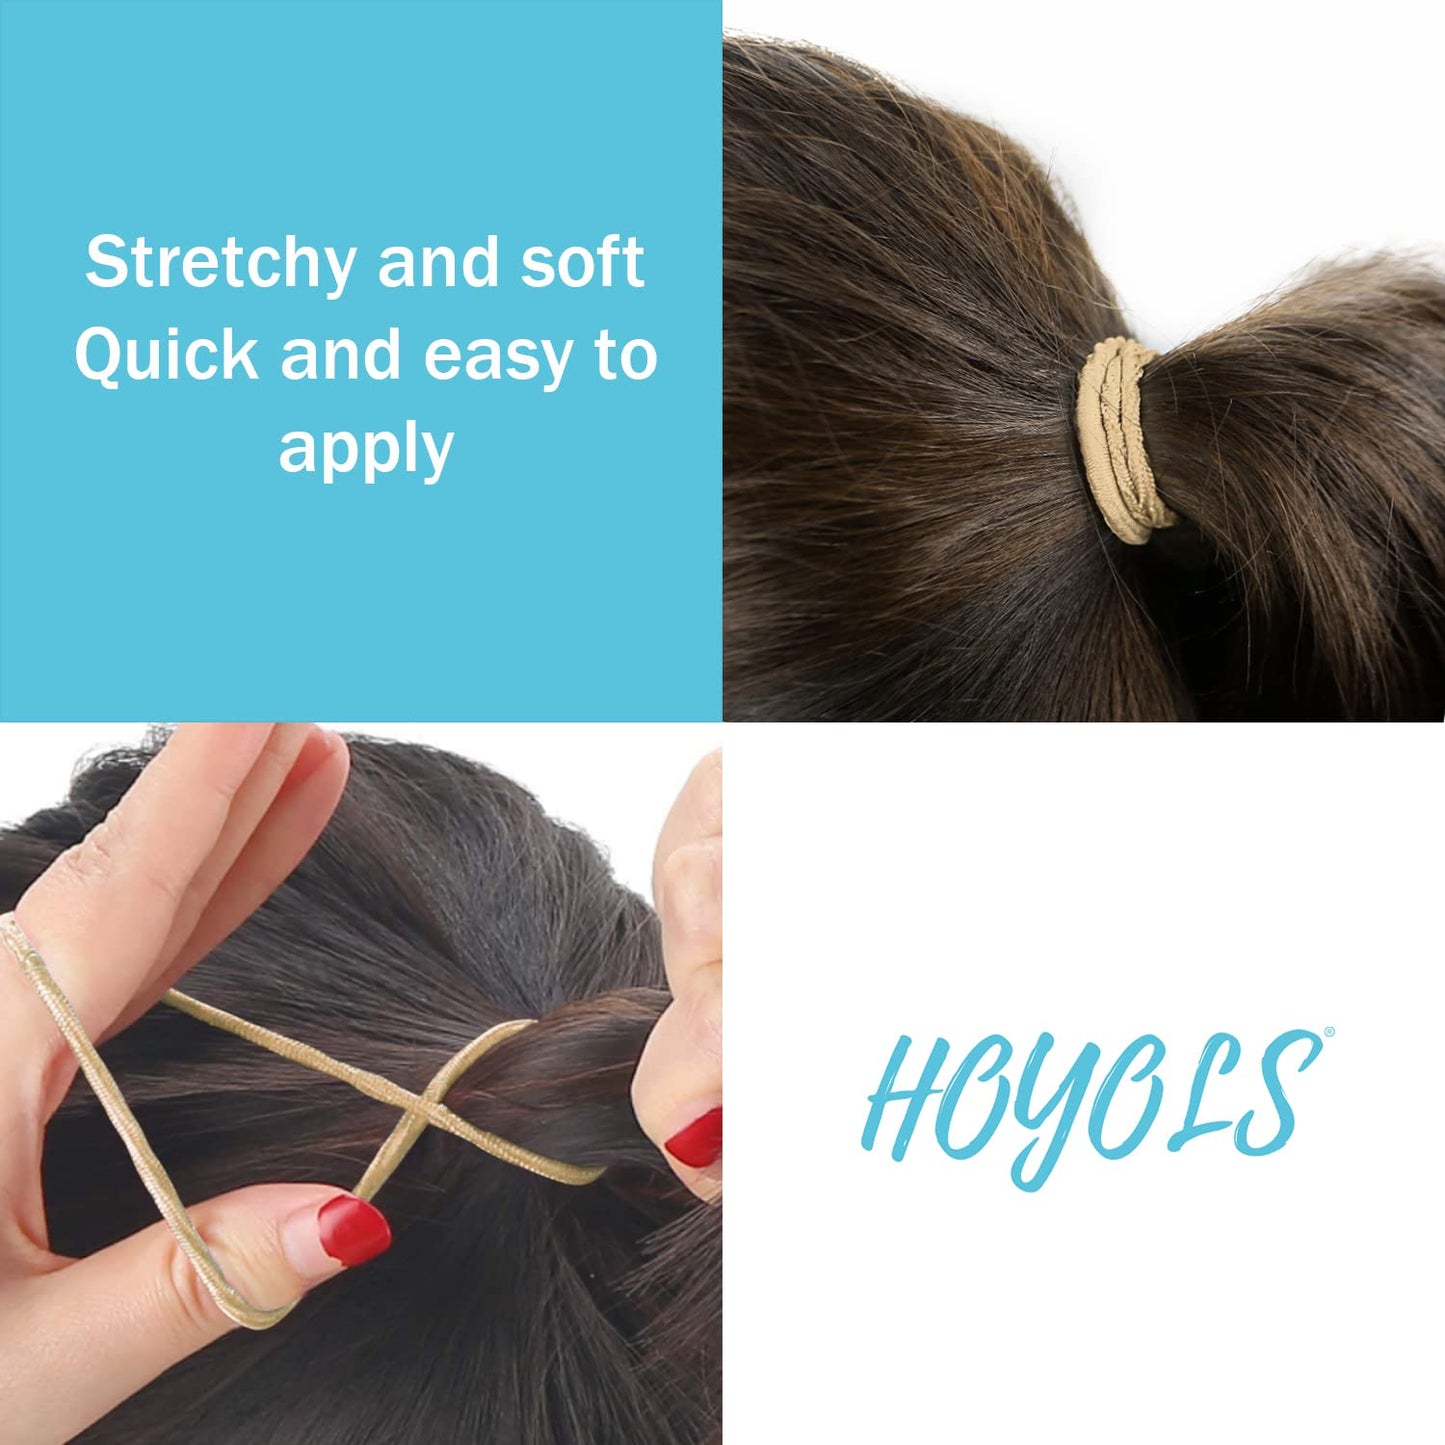 Hoyols Small Golden Blonde Ponytail Holder 2mm, Hair Bands for Girls Kids Women Hair Hairties Ligas Para El Cabello De Mujer Pony Tail Holders 100 Count (Golden Blonde)